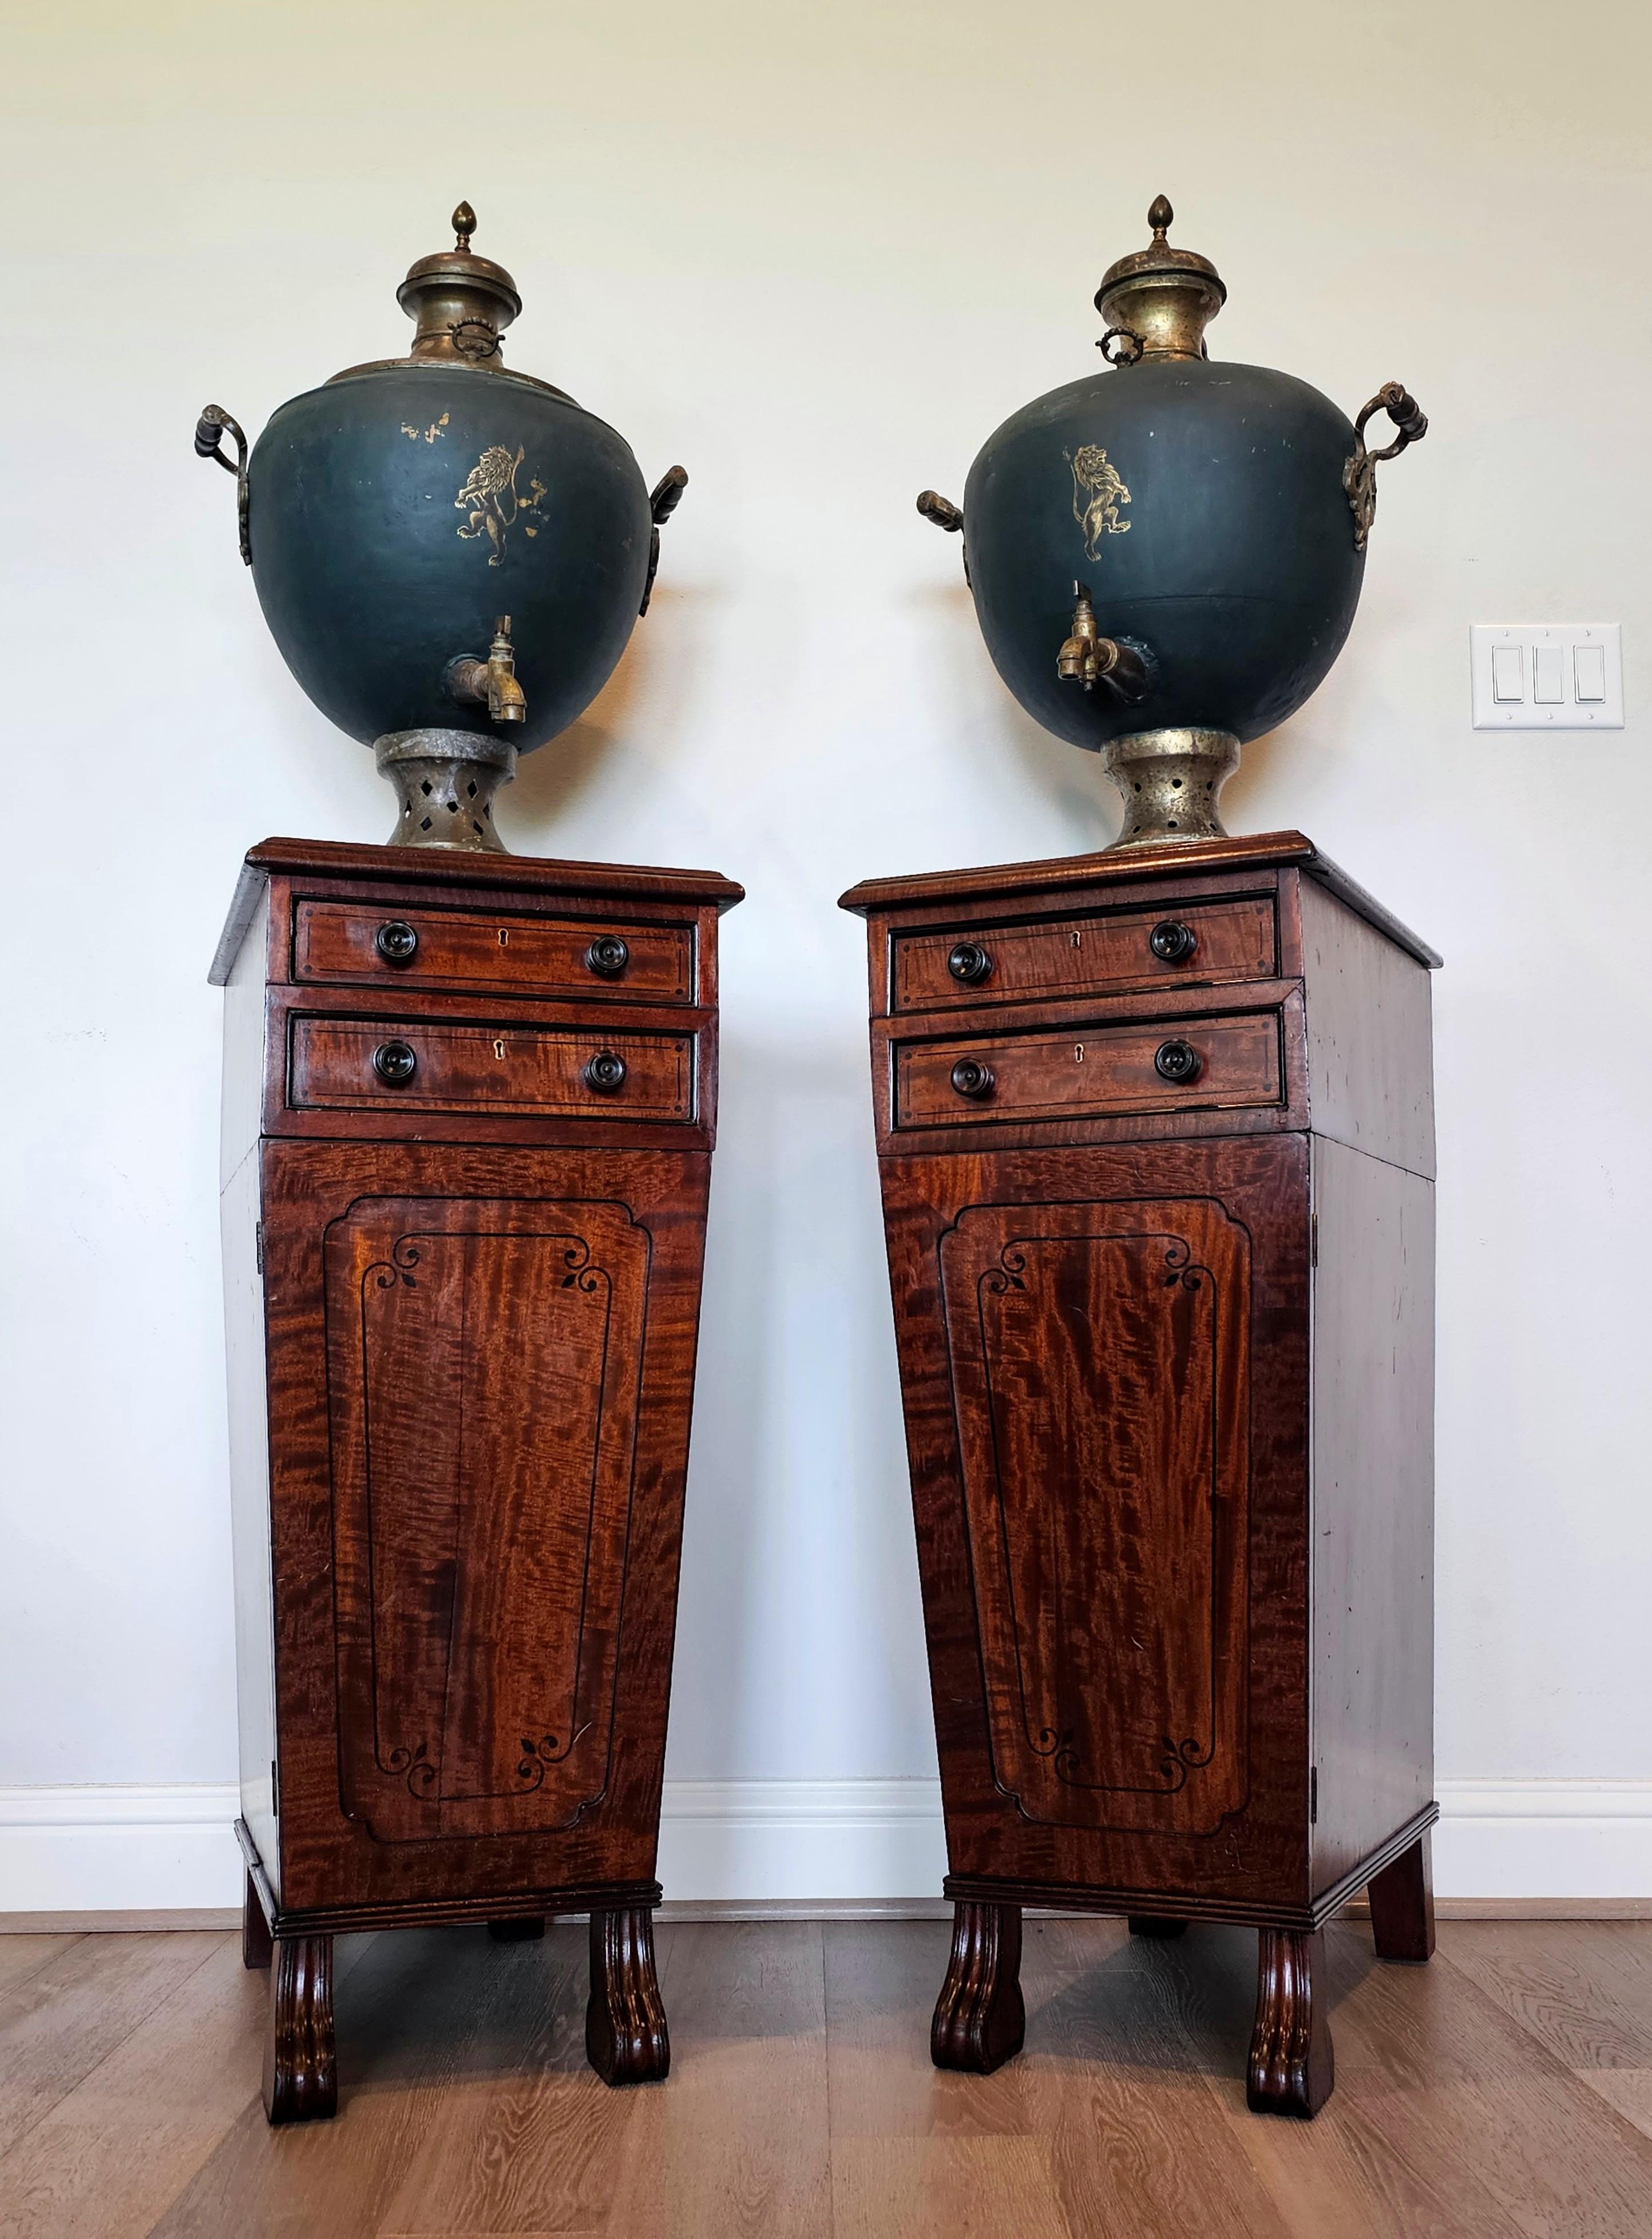 A magnificent pair of monumental antique English samovars on Regency period (1800-1830) mahogany cellarettes or liquor / wine side cabinets.

Originating in England, cellarettes were generally fine quality custom made wooden chests intended to